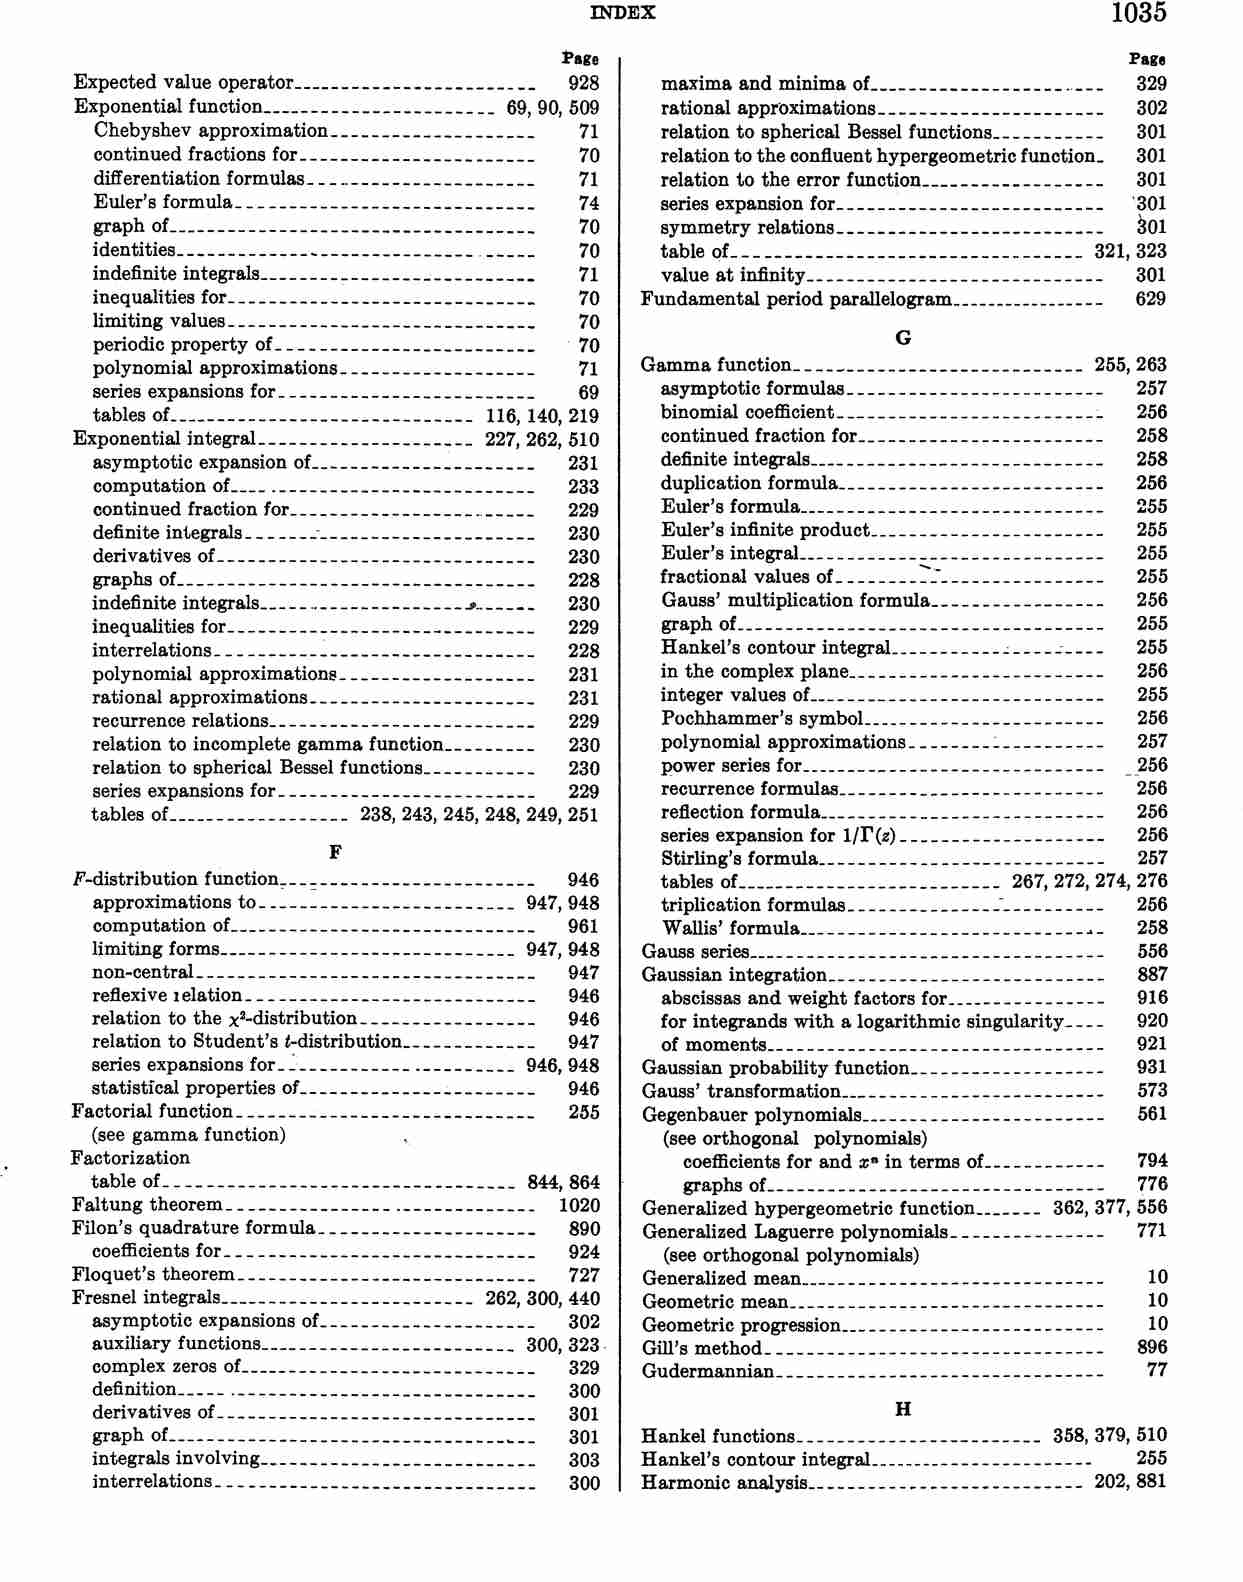 image of page 1035